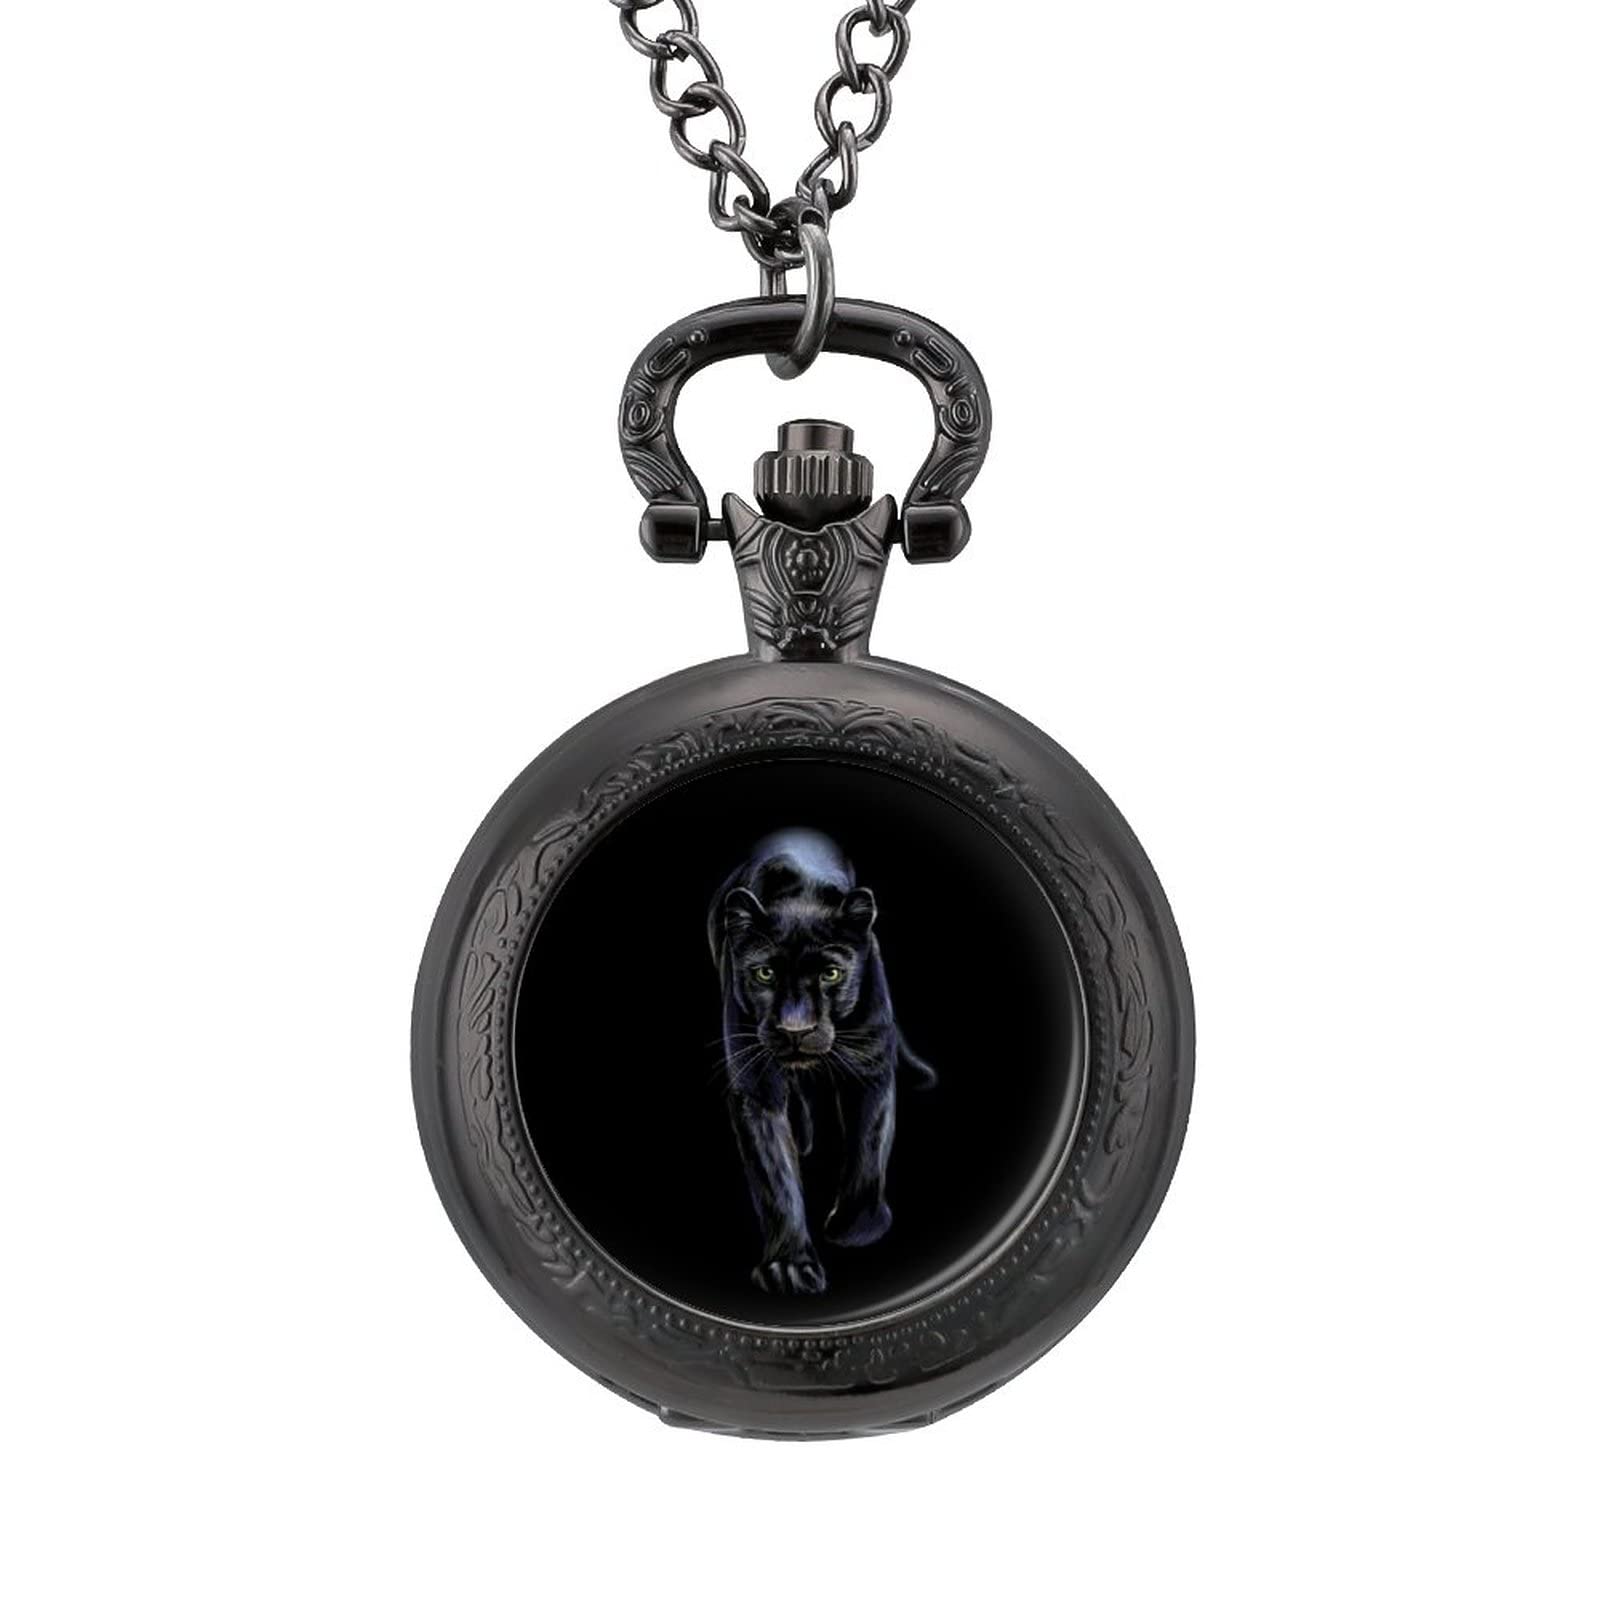 Color Portrait of A Walking Panther Quartz Pocket Watch With Chains Retro Necklace For Birthday Valentine's Day Wedding Gift